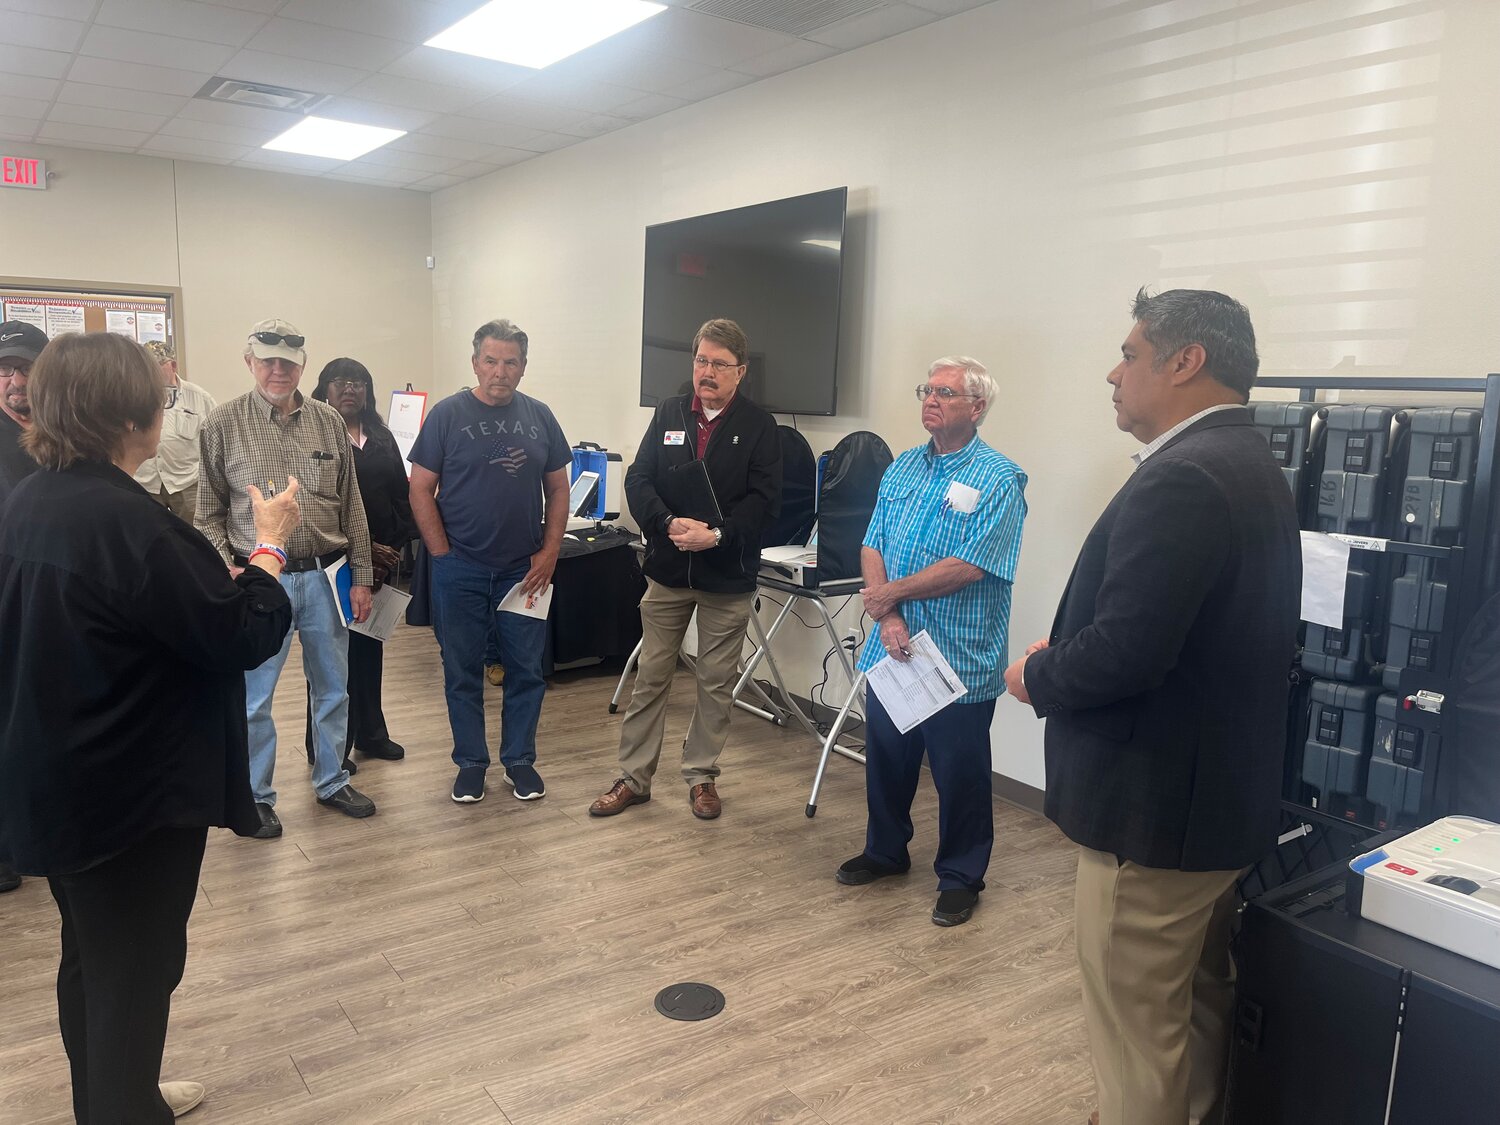 Tony Cervantes (far right) from the Hart InterCivic listens to Wood County voters during a discussion last Thursday concerning voting machines at the elections office meeting room.